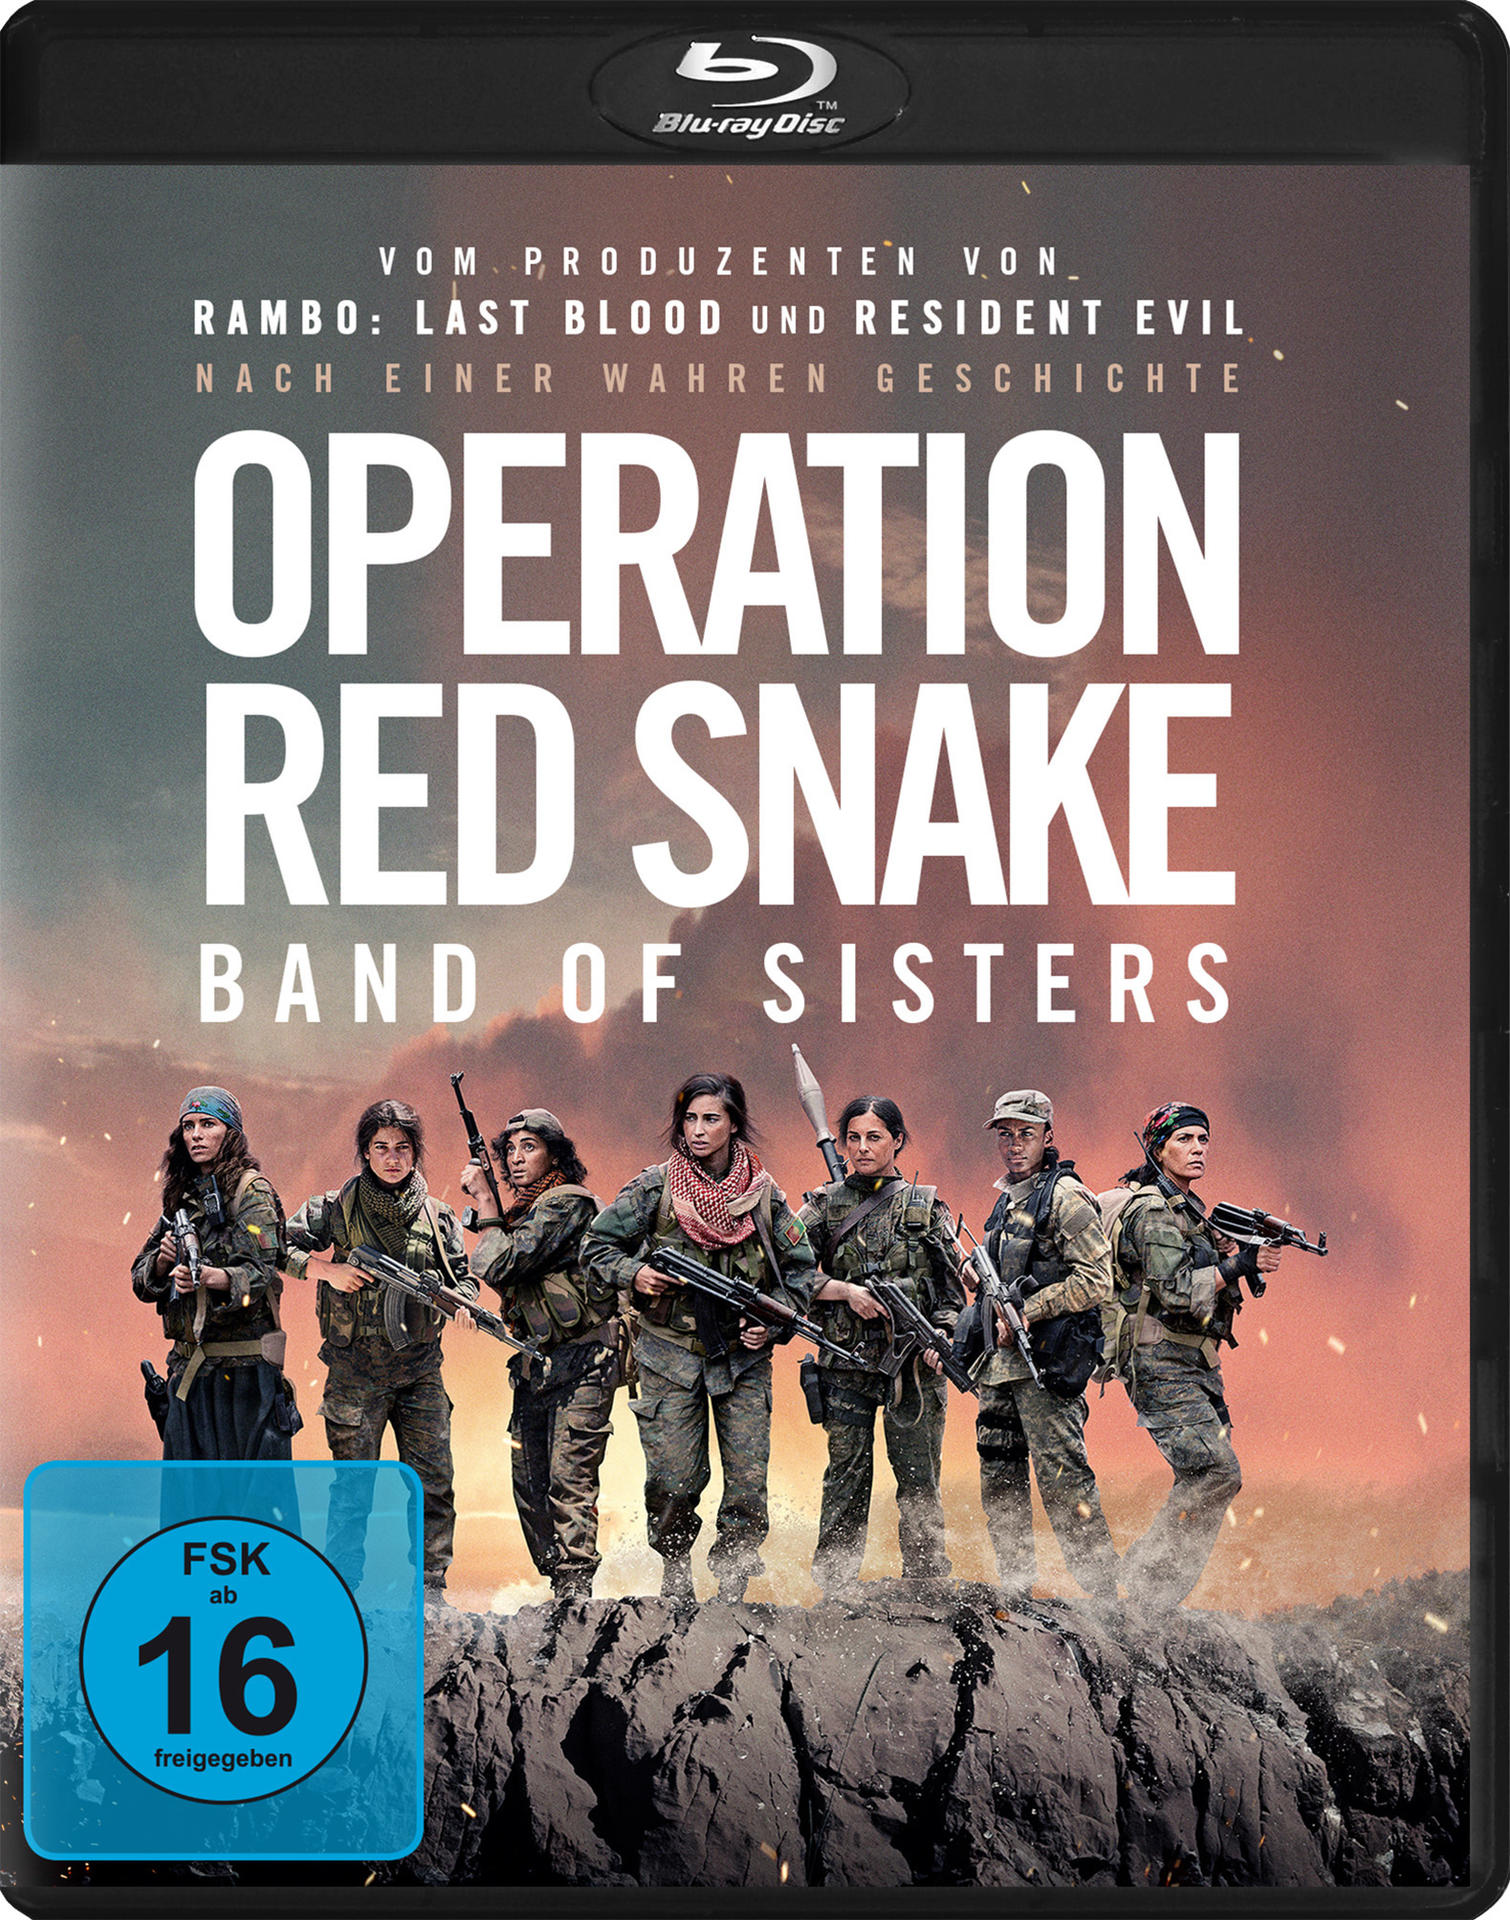 - of Operation Blu-ray Sisters Red Snake Band